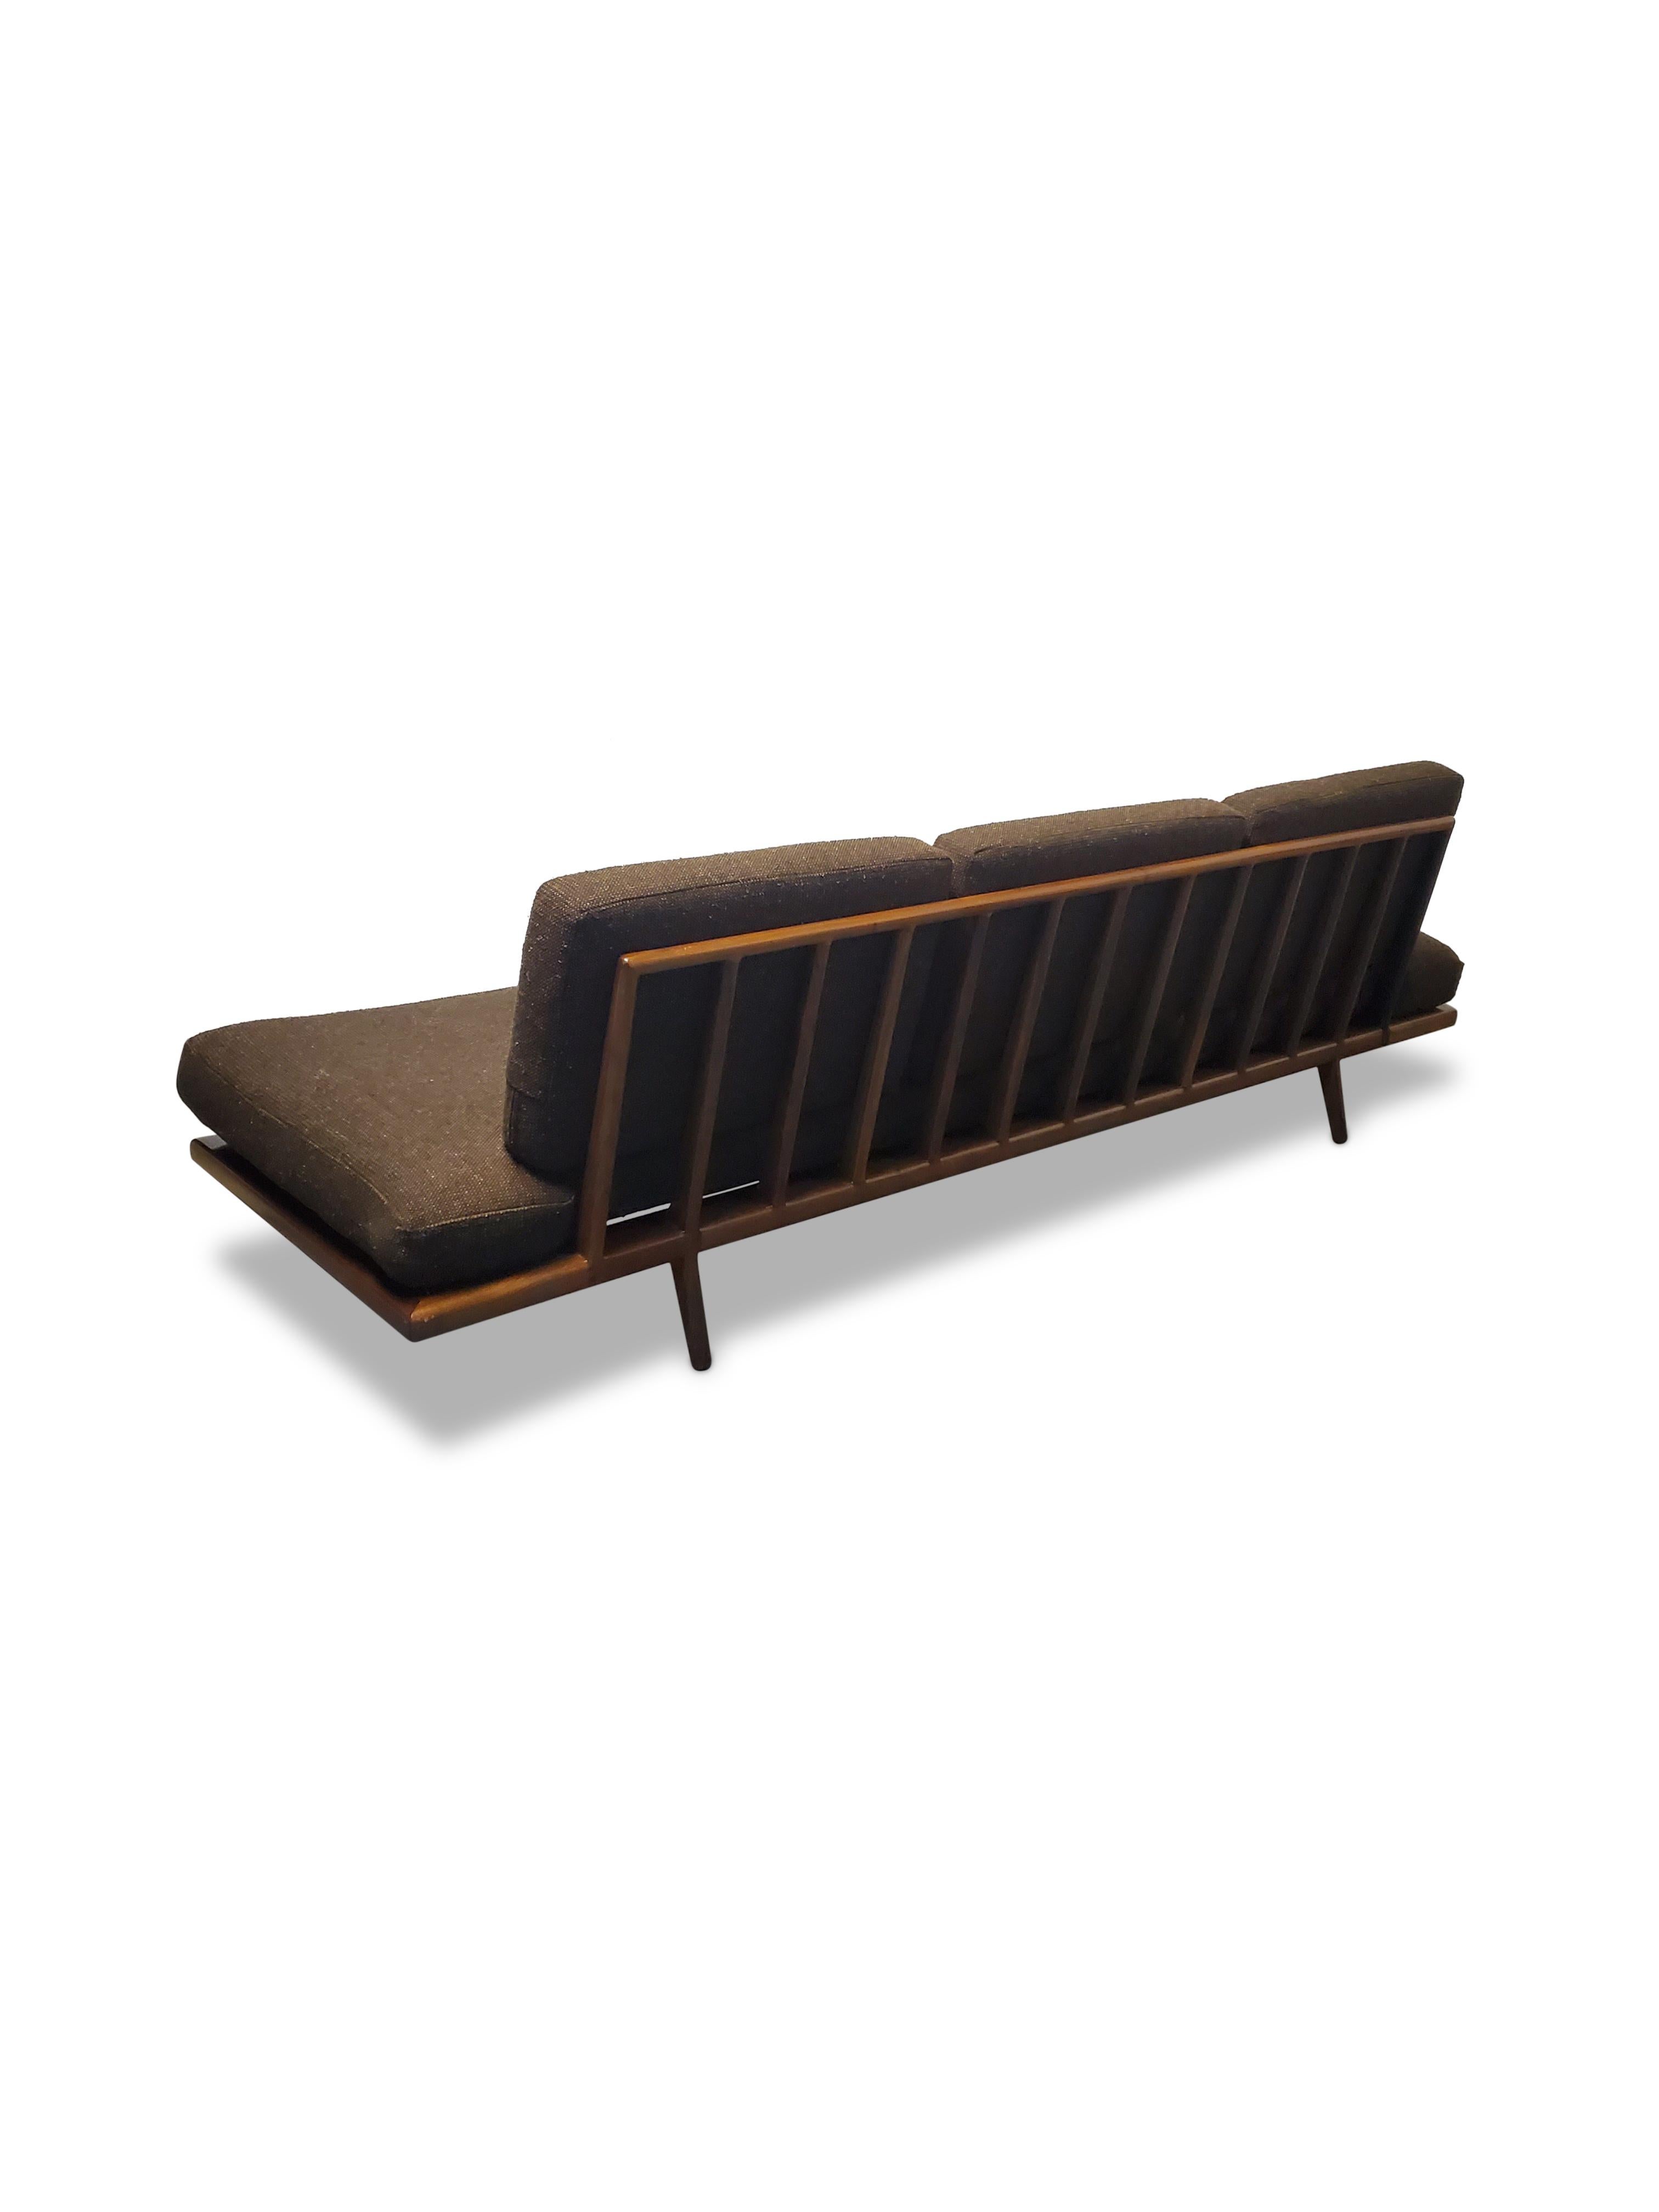 20th Century Mel Smilow Daybed Couch For Sale